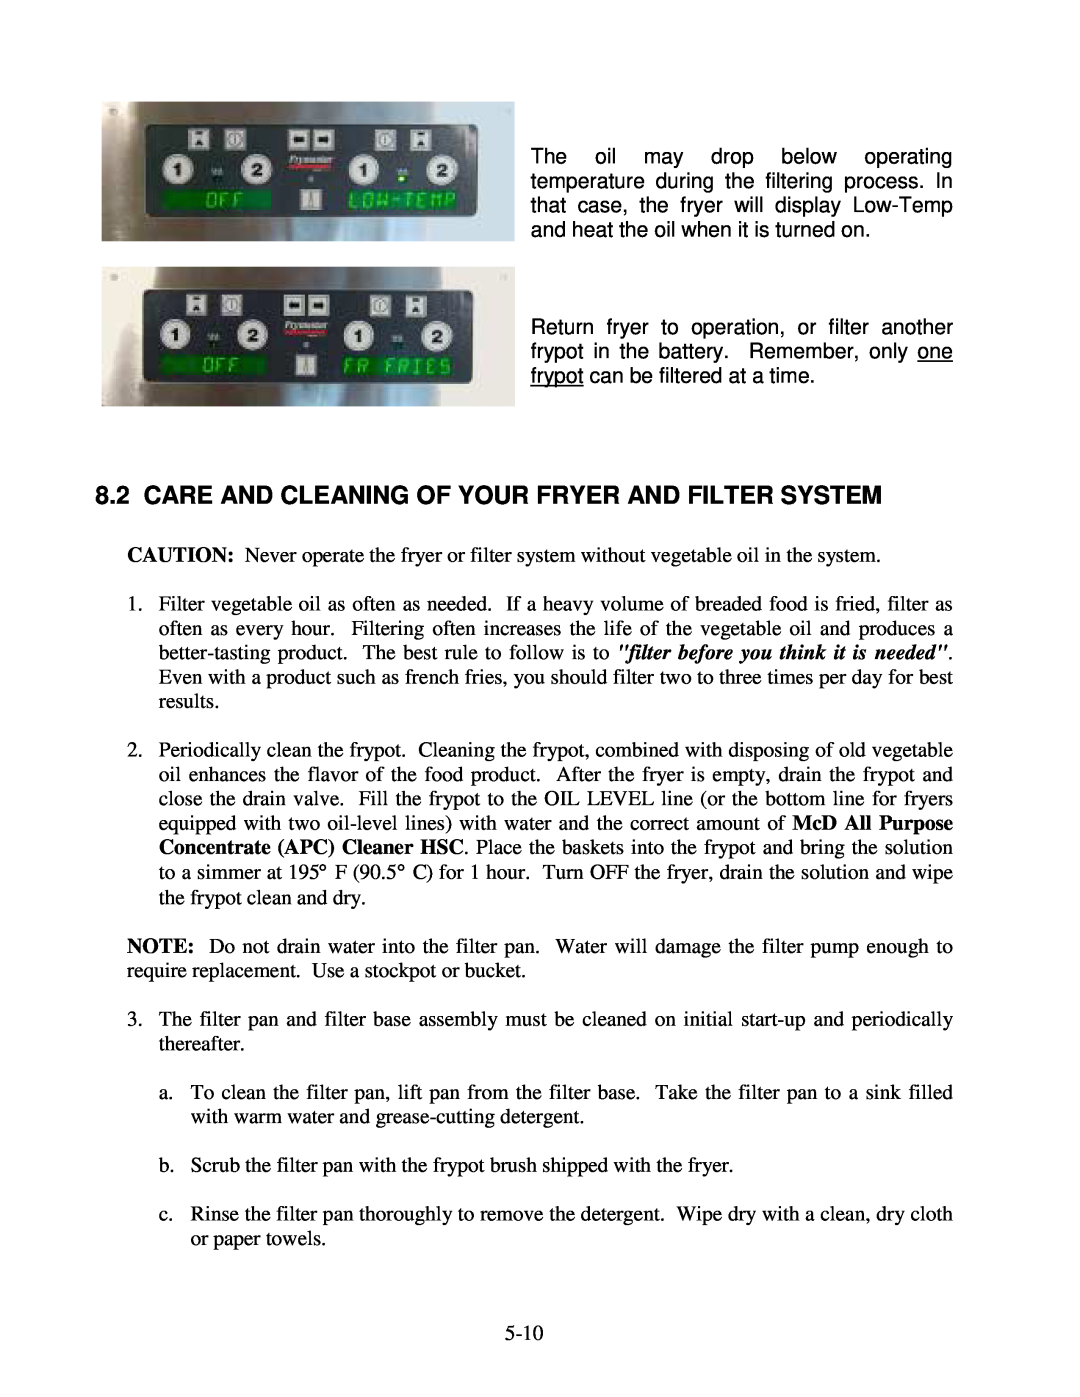 Frymaster H14 Series service manual Care And Cleaning Of Your Fryer And Filter System 